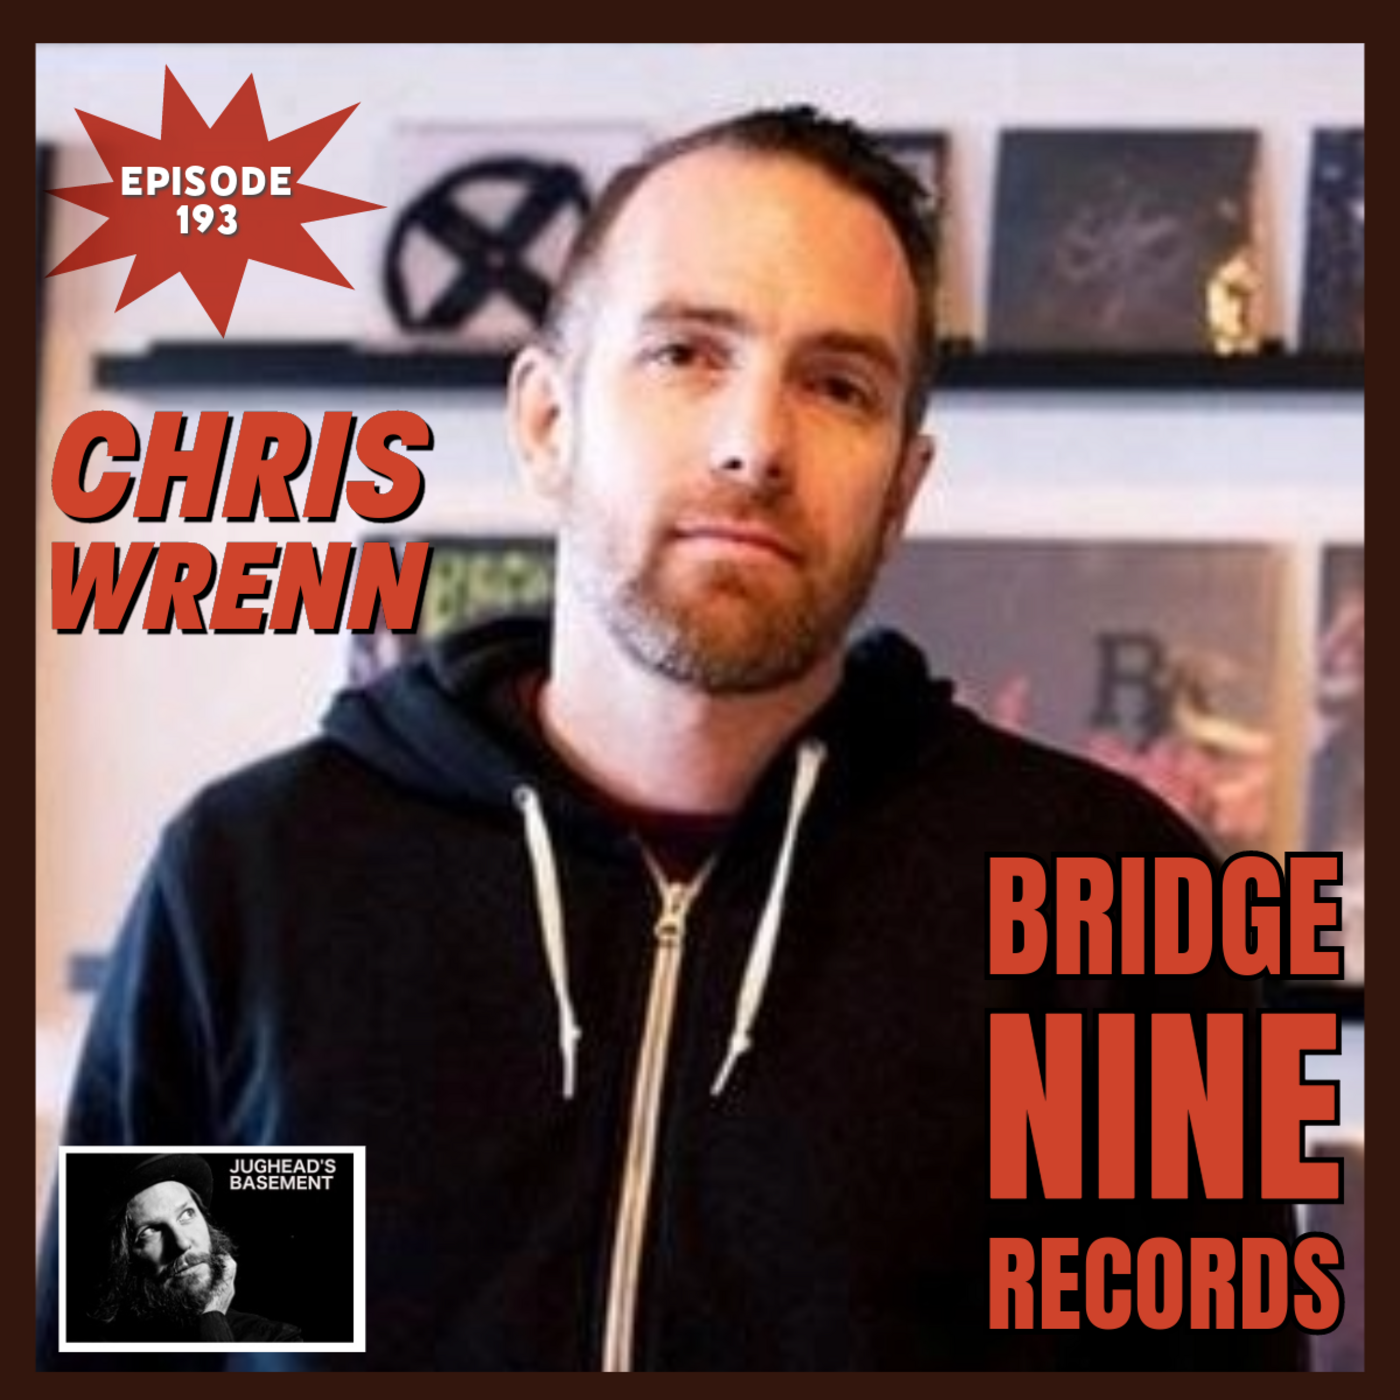 Episode 193: Episode 193: Chris Wrenn of Bridge Nine Records and Sully's Brand on LoFi Interviews with HiFi Guests